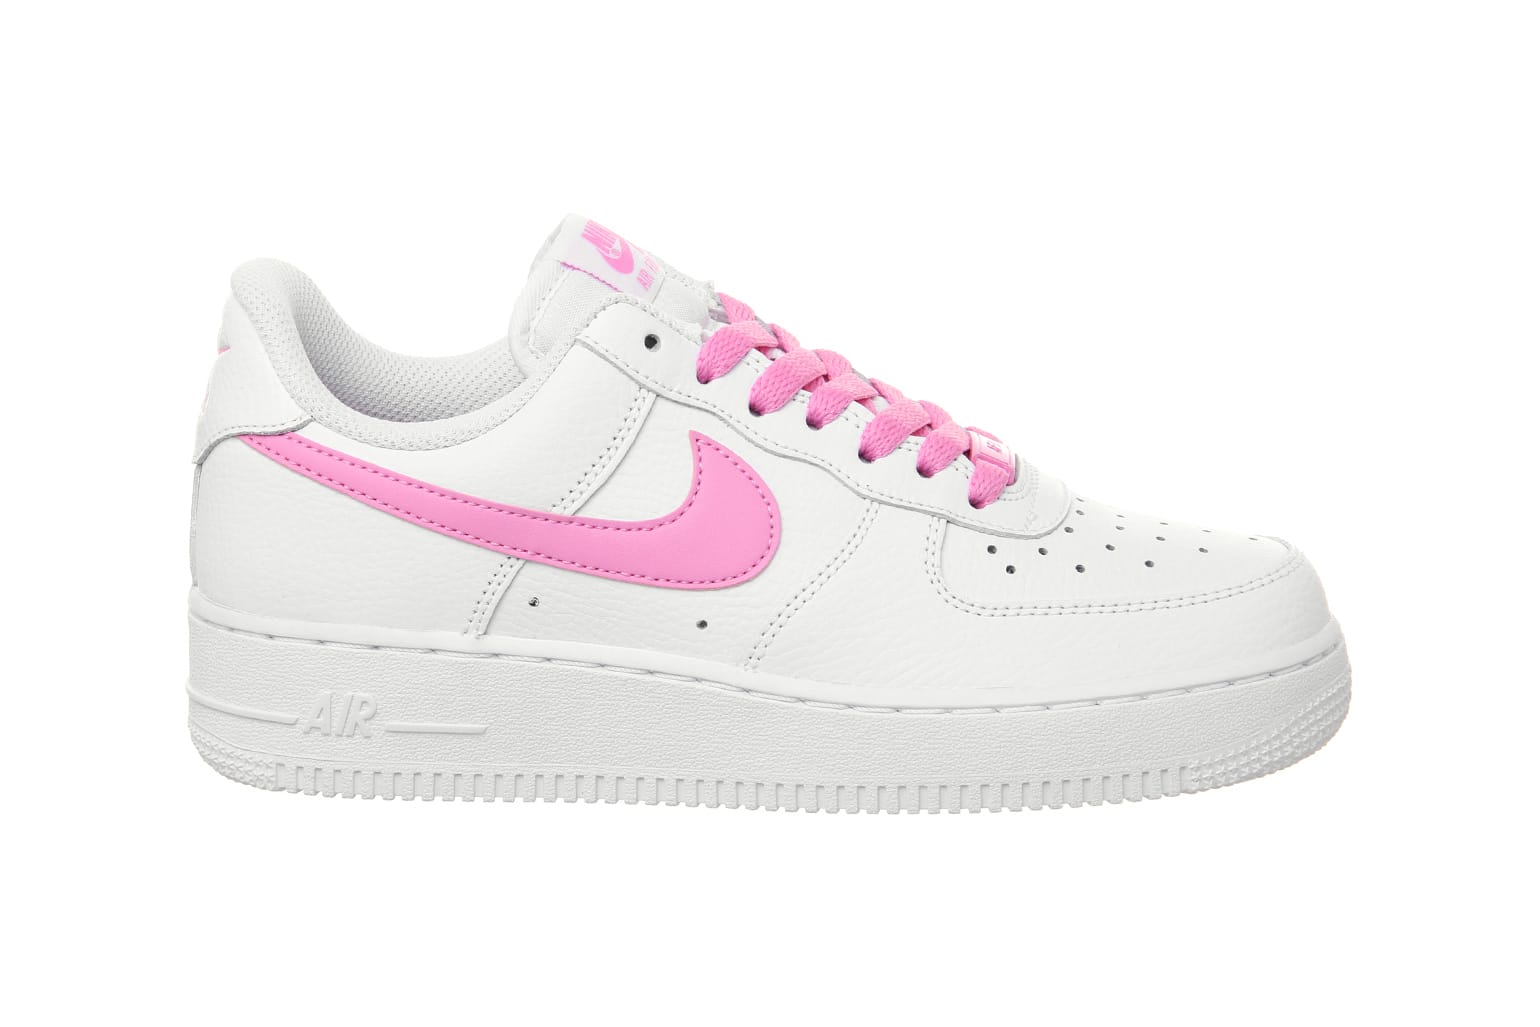 pink nike air force trainers